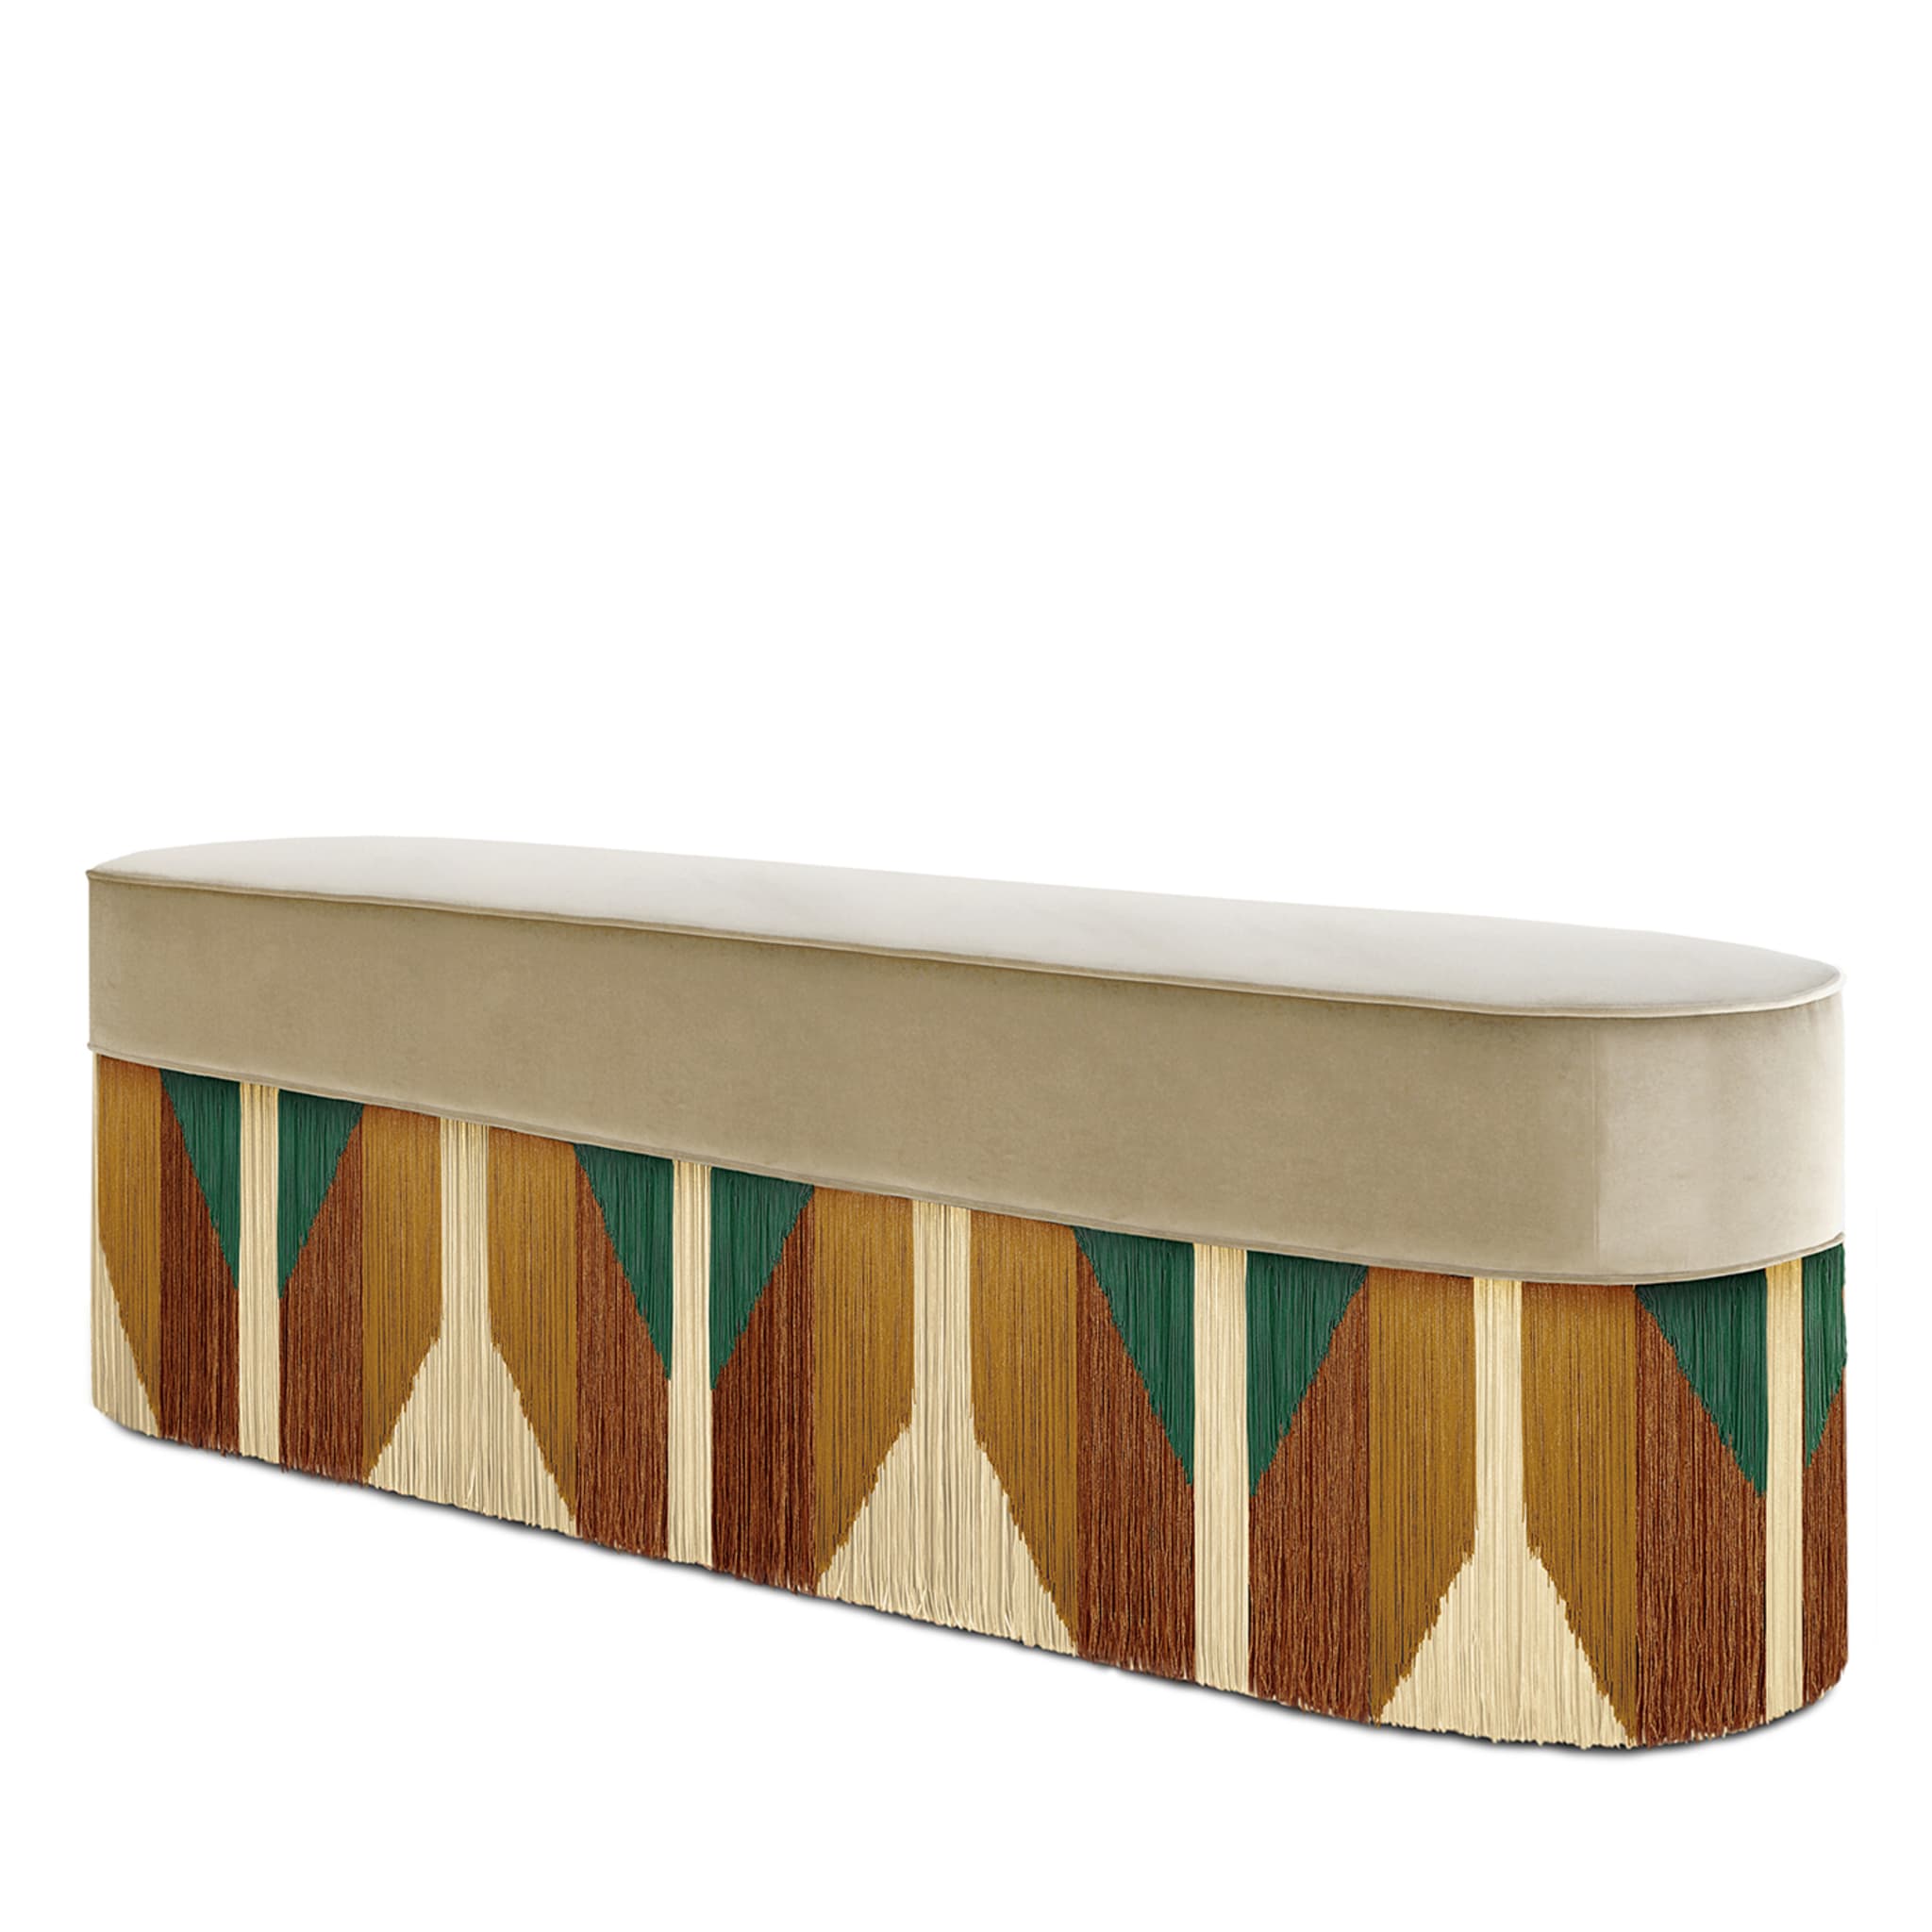 Couture Tribe Polychrome Bench #3 - Alternative view 2